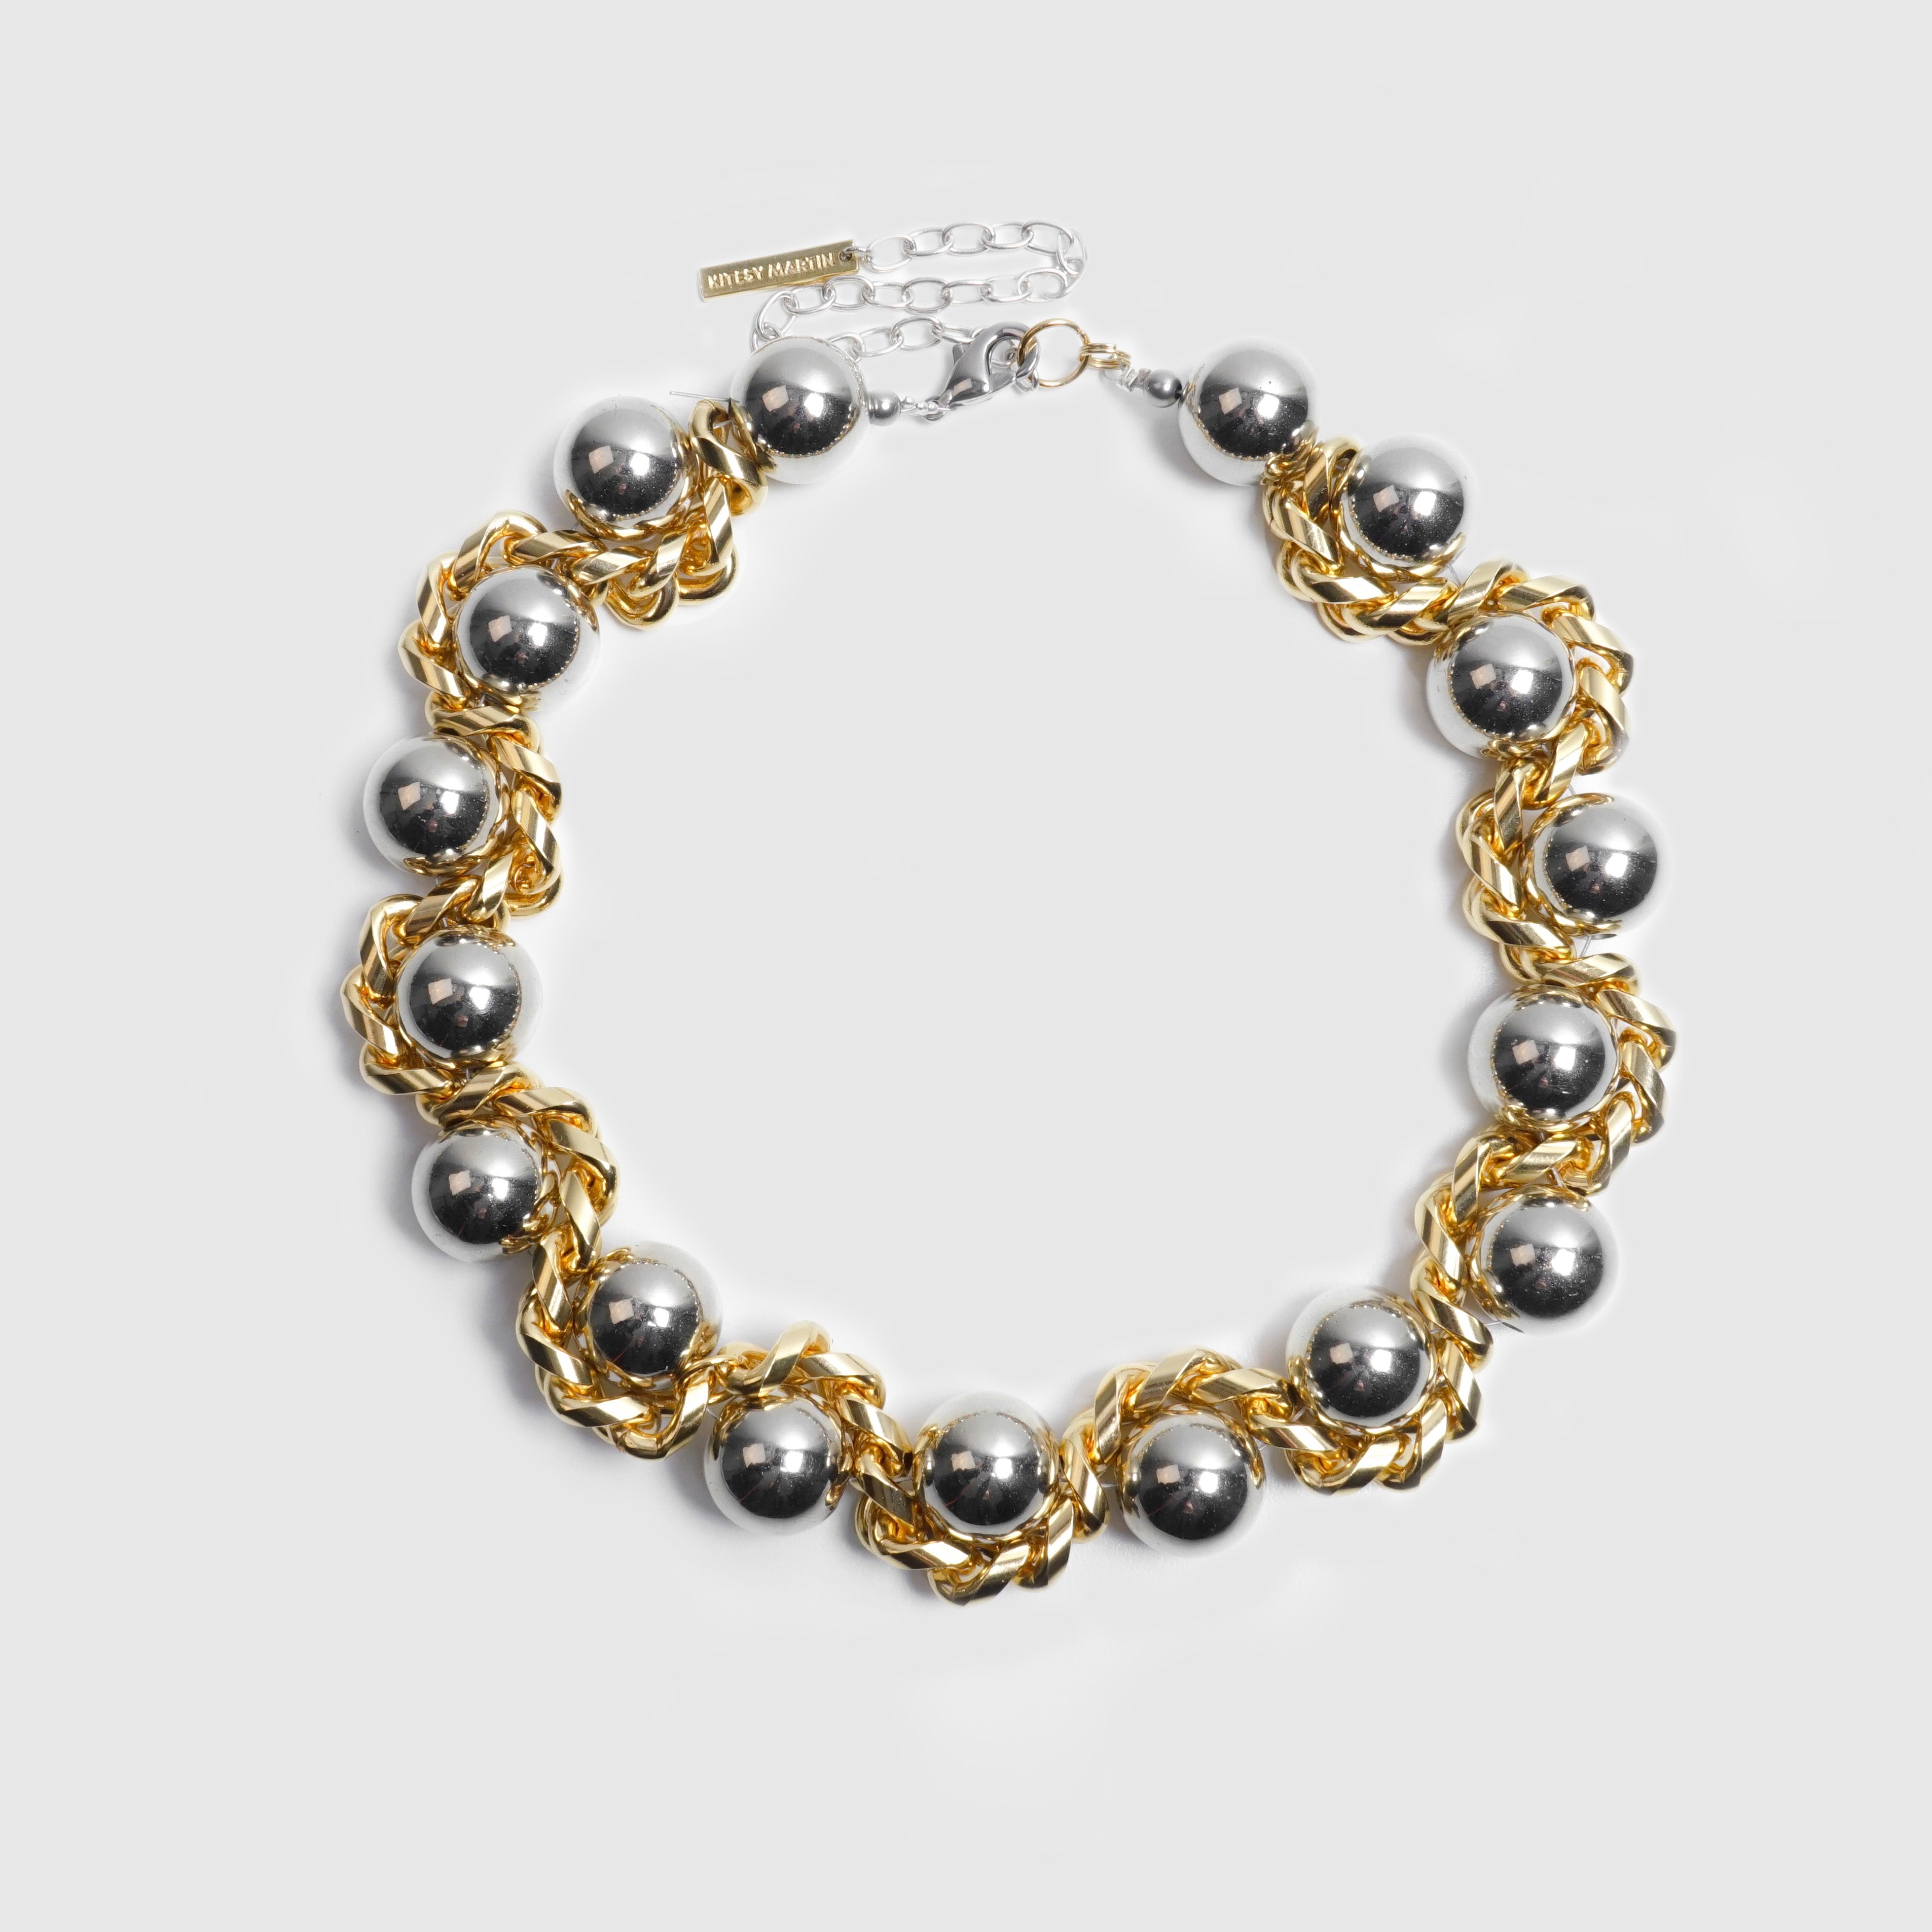 NECKLACE LE SERPENT CHUNKY GOLDEN/SILVERED